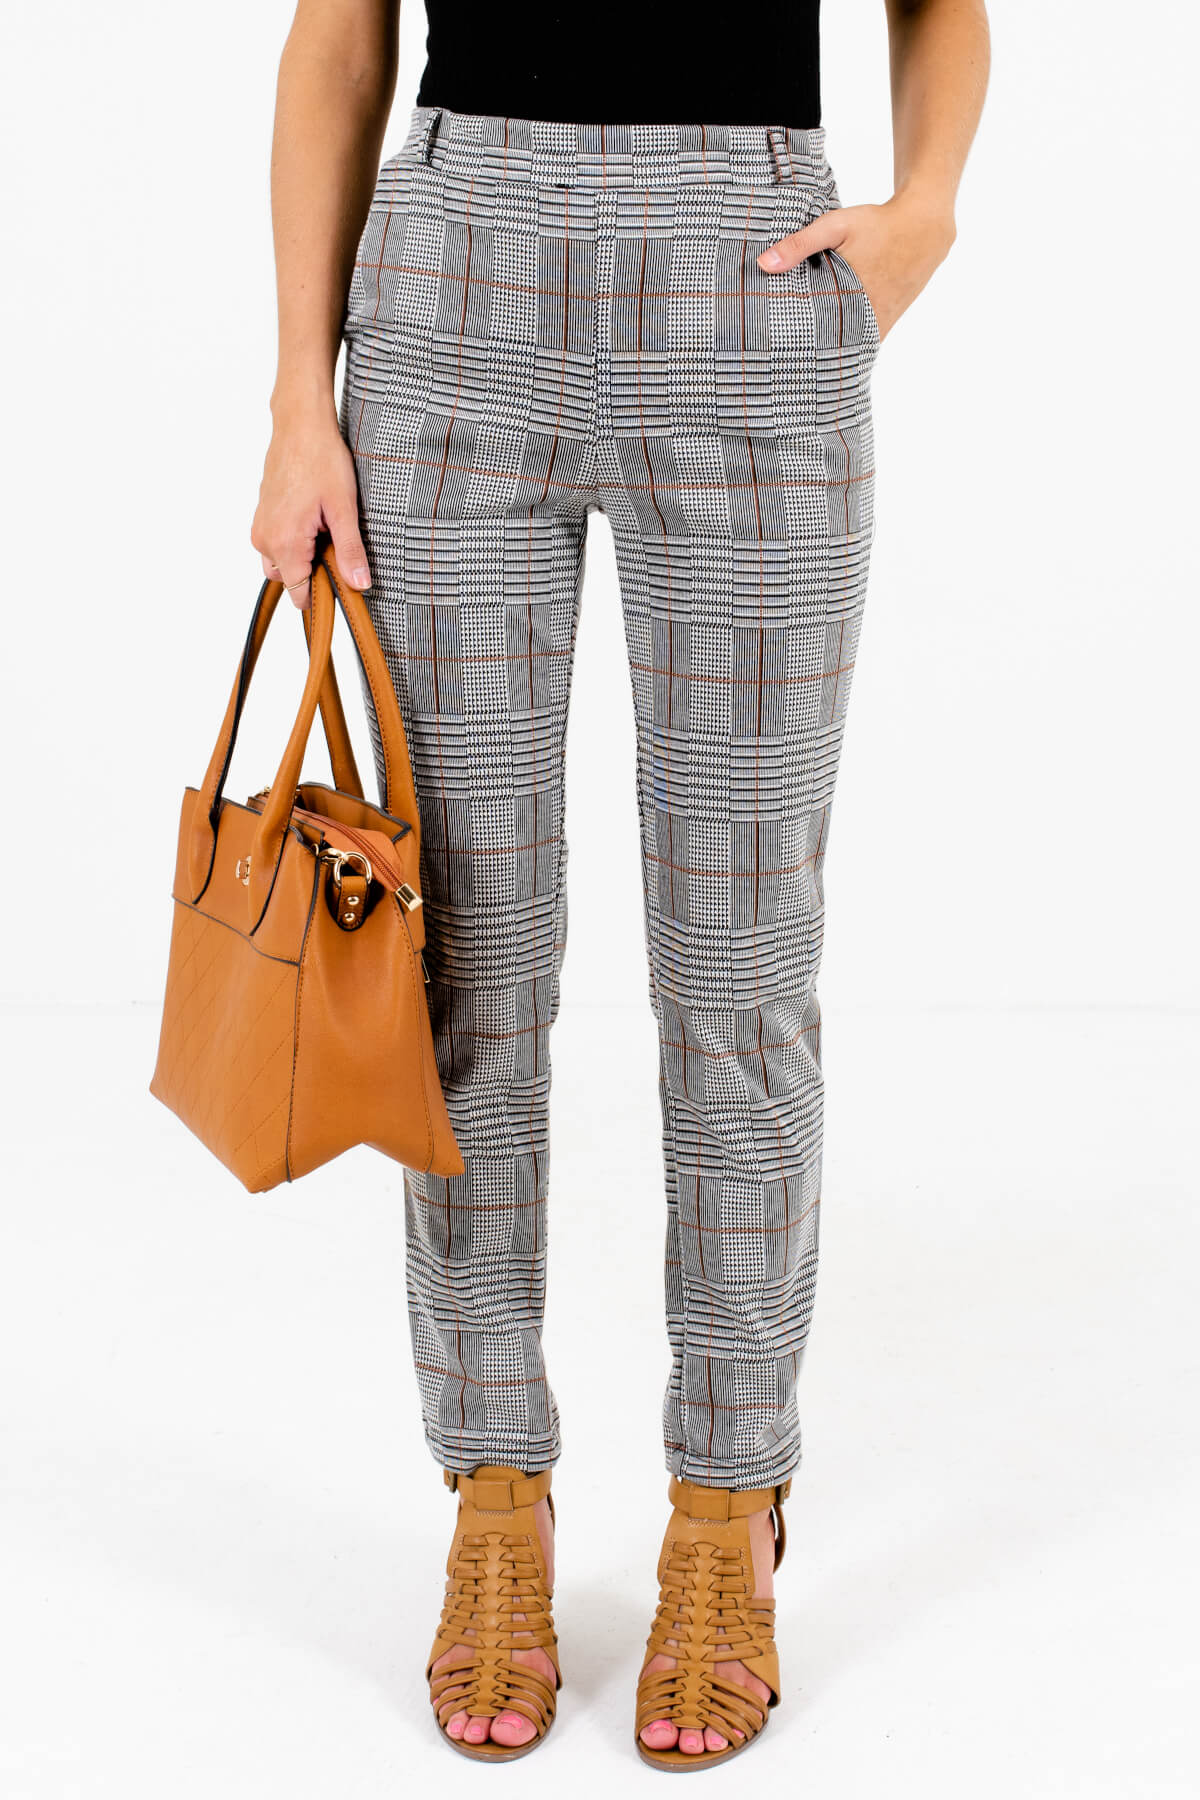 Gray, Black, Cream, and Rust Plaid Patterned Boutique Pants for Women